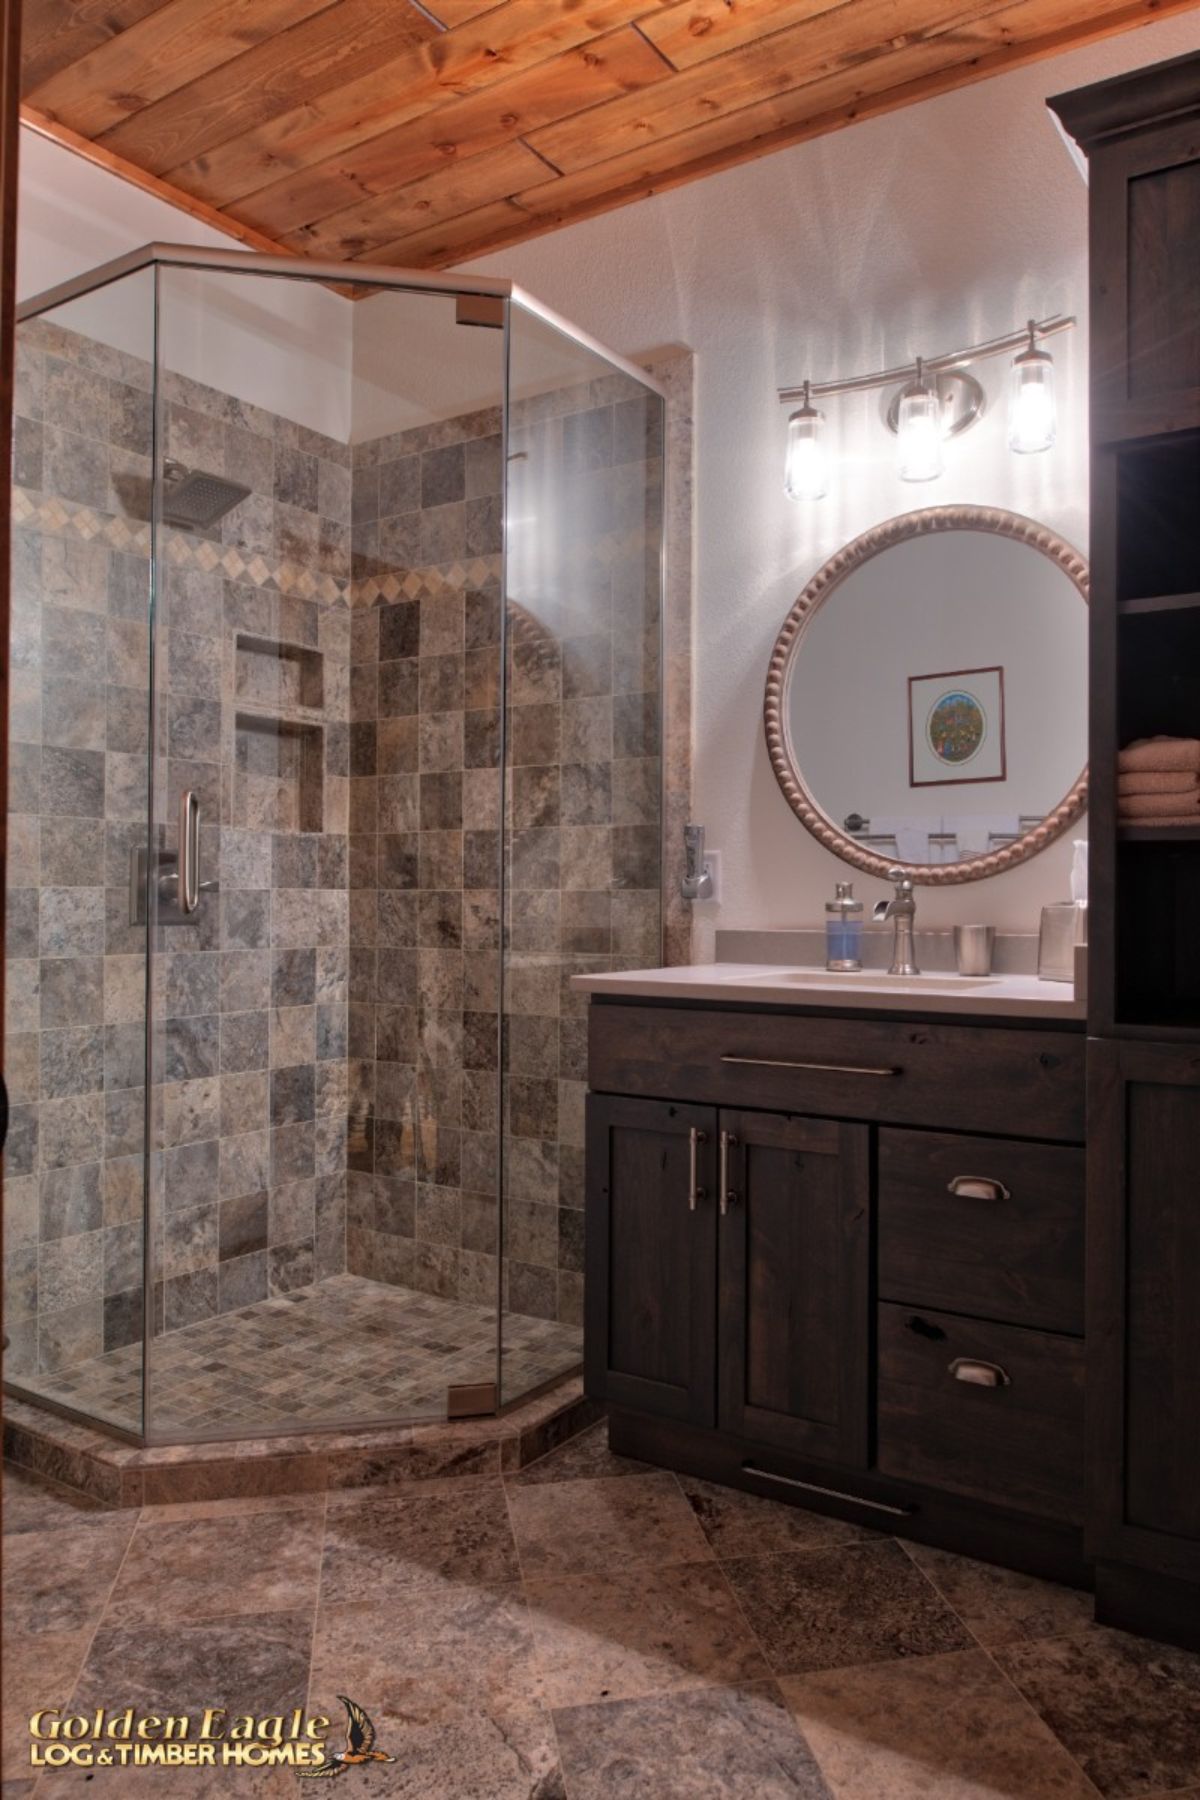 white and gray tile in glass shower next to dark wood vanity with round mirror on white wall above